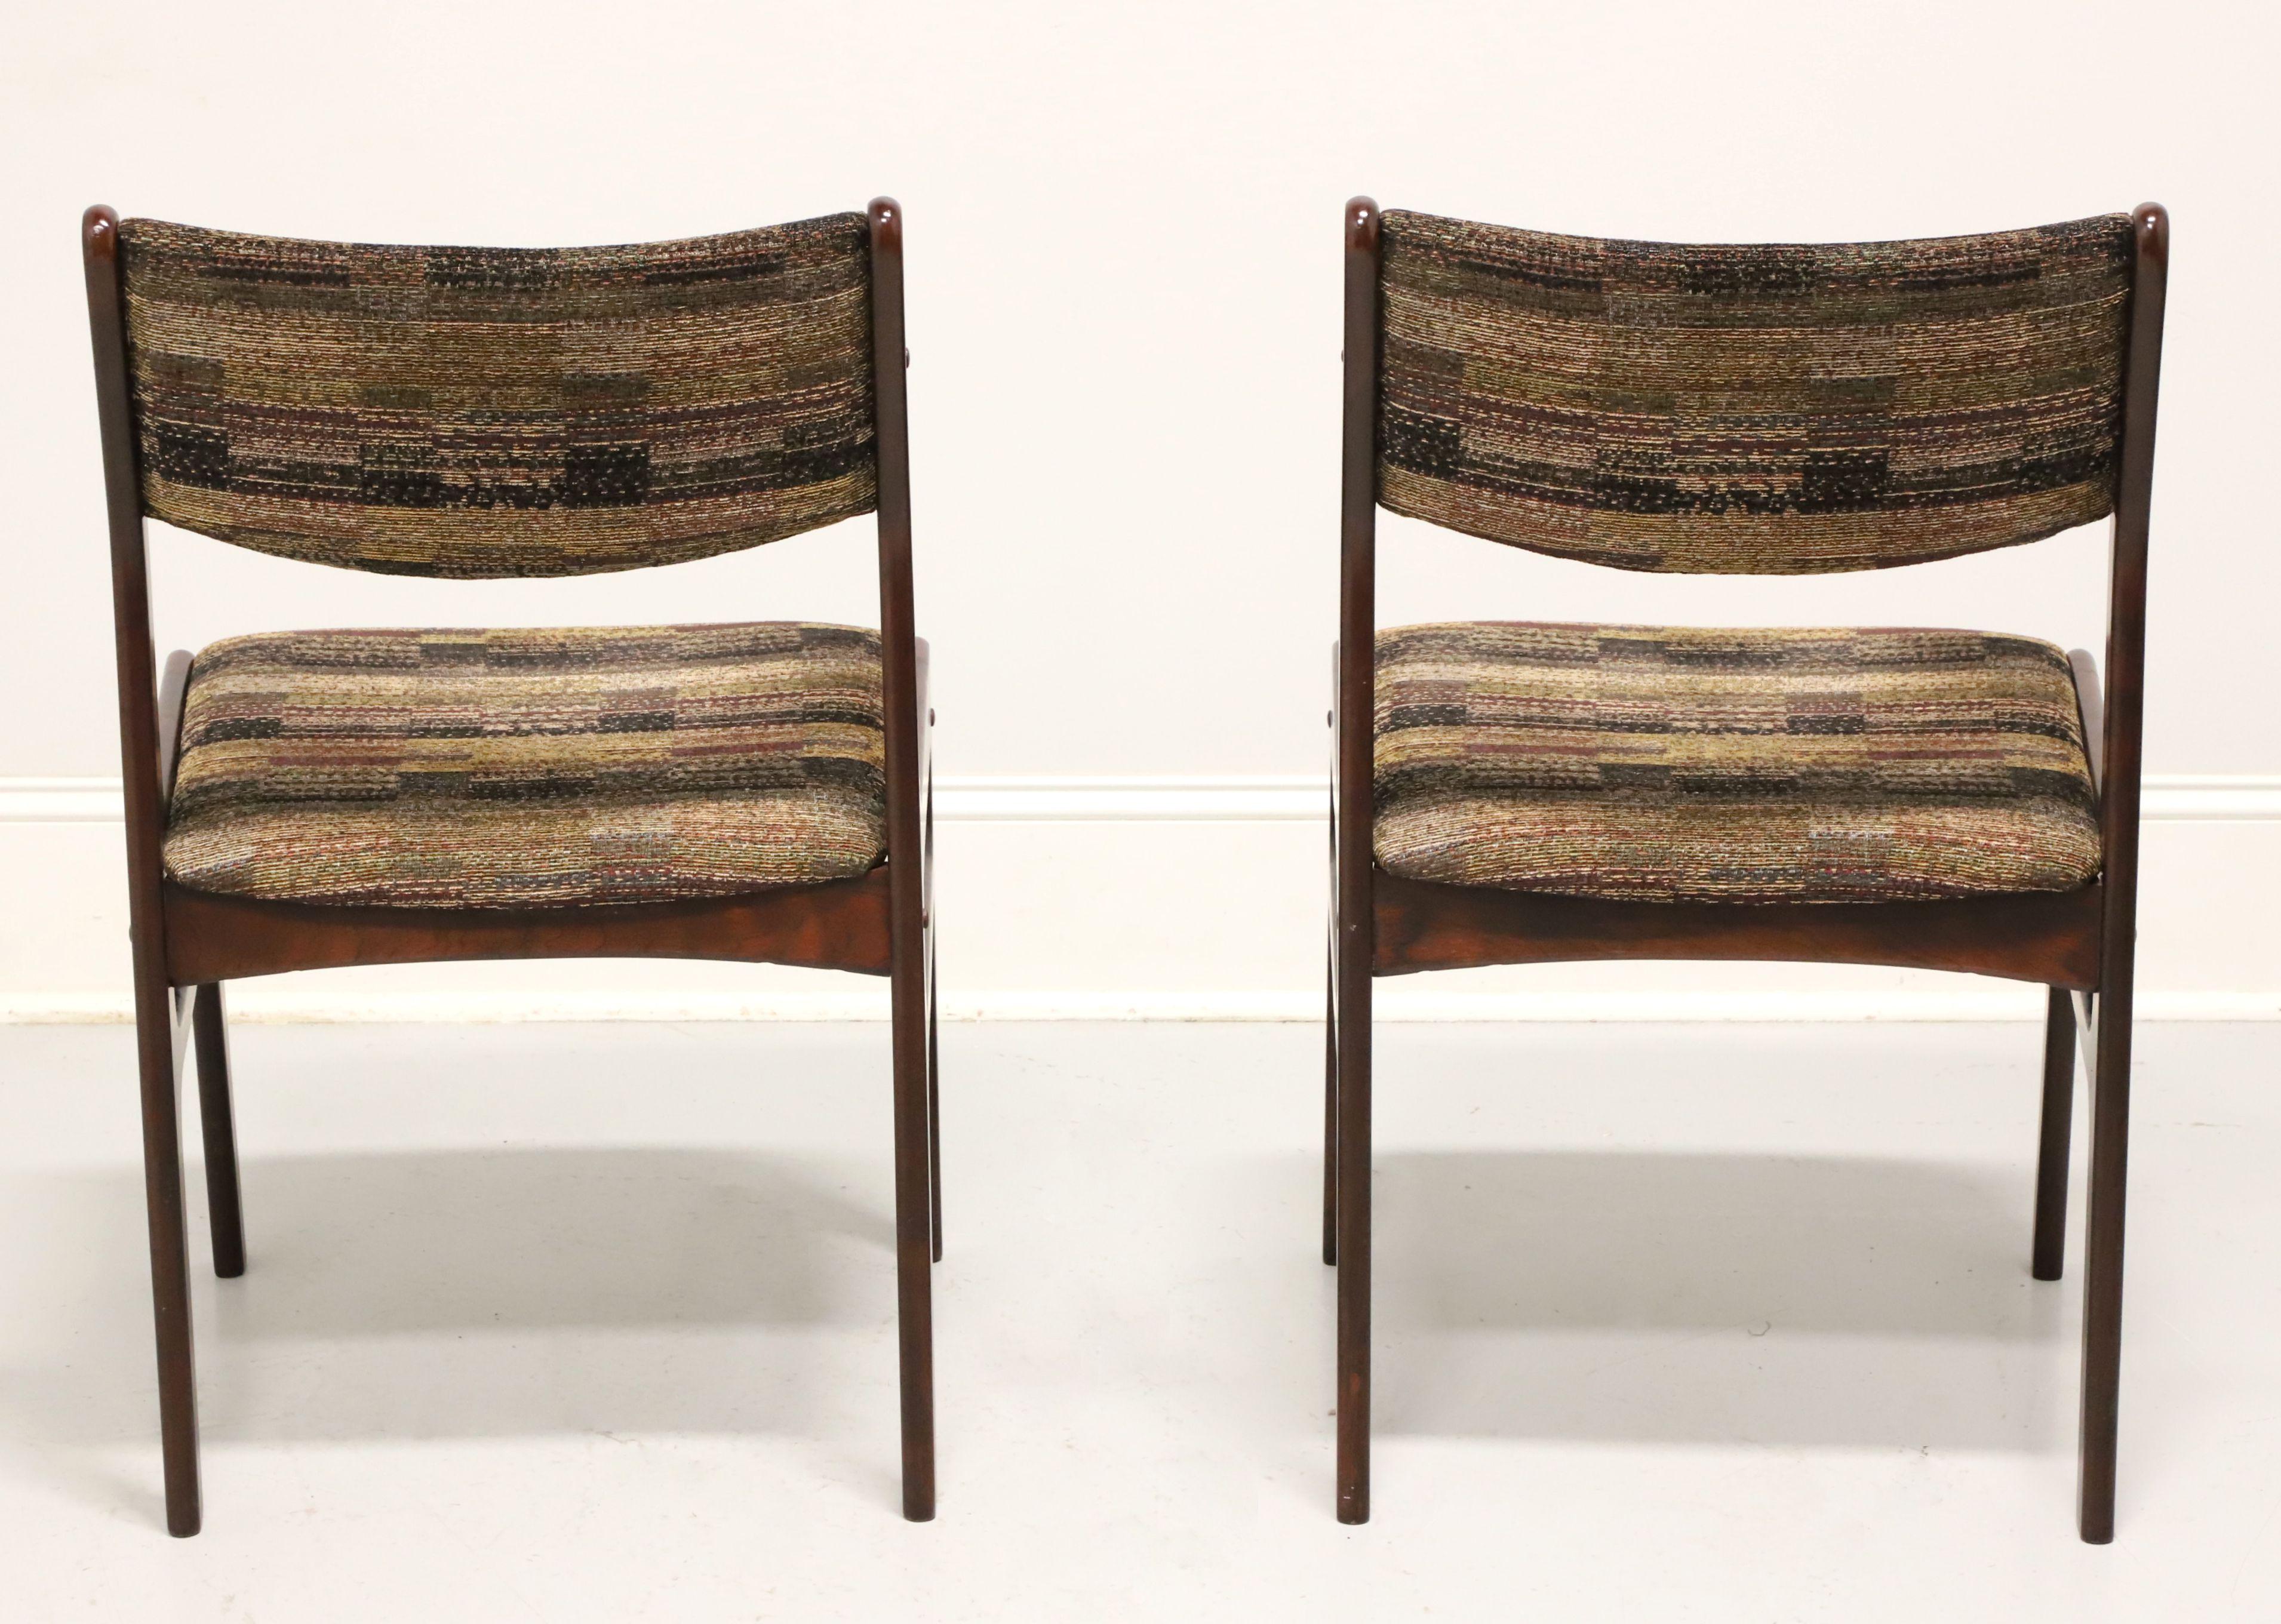 DYRLUND Mid 20th Century Rosewood Danish Modern Dining Side Chairs - Pair C In Good Condition For Sale In Charlotte, NC